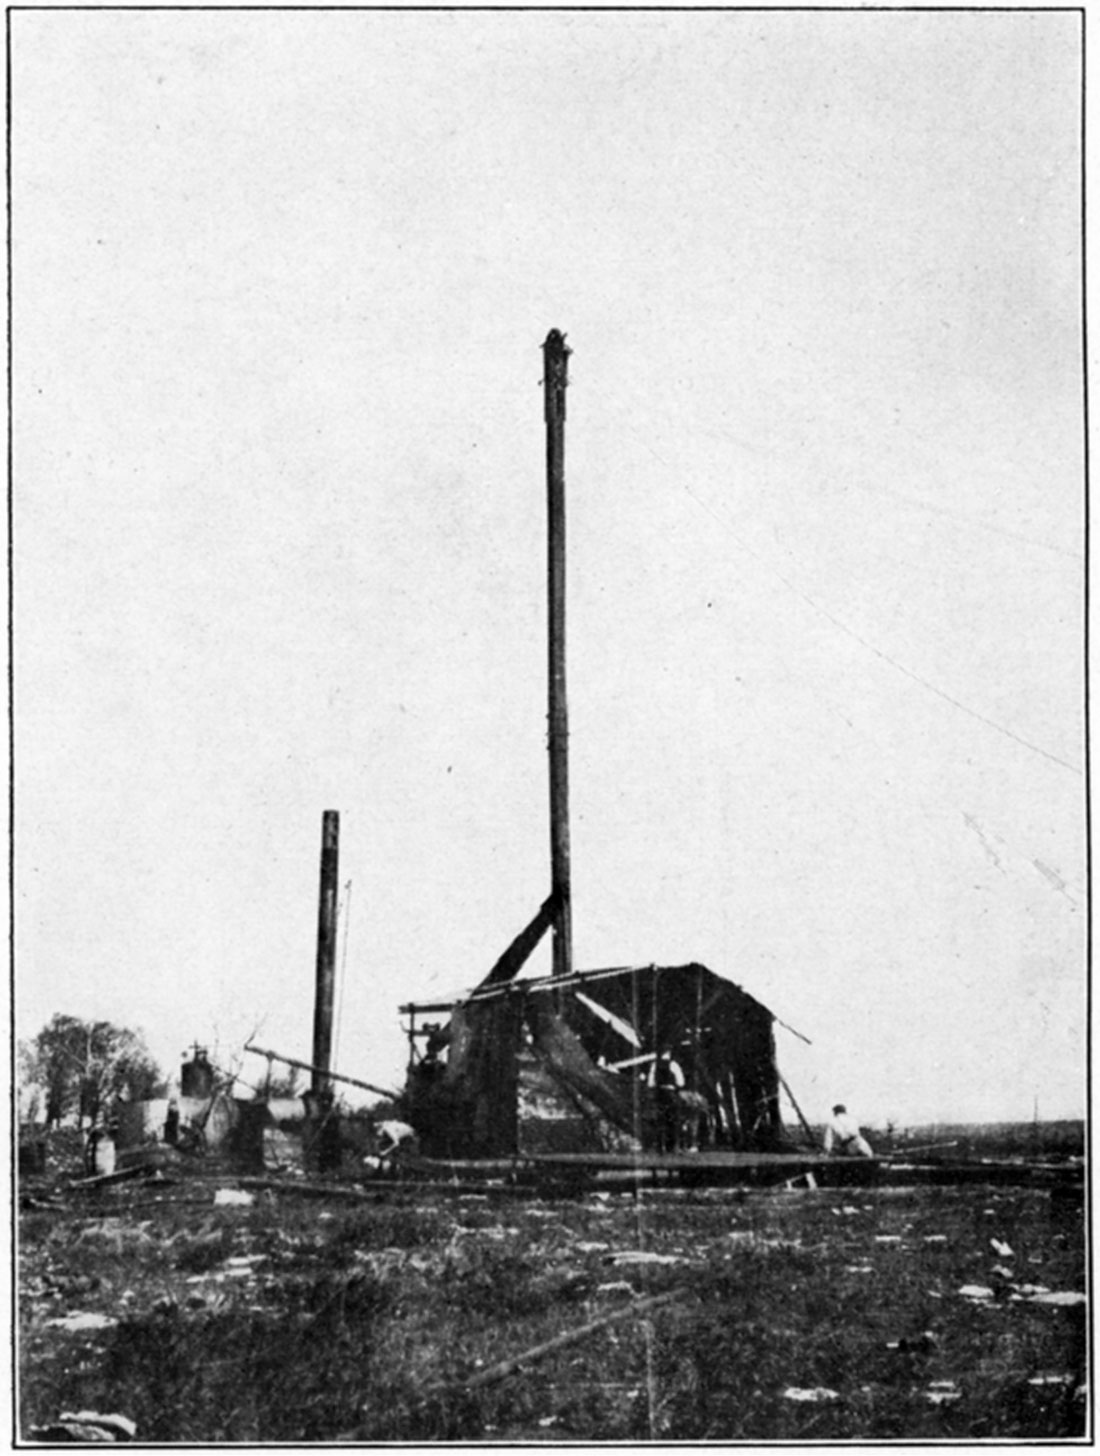 Black and white photo of Star drilling rig, south of Sedan.